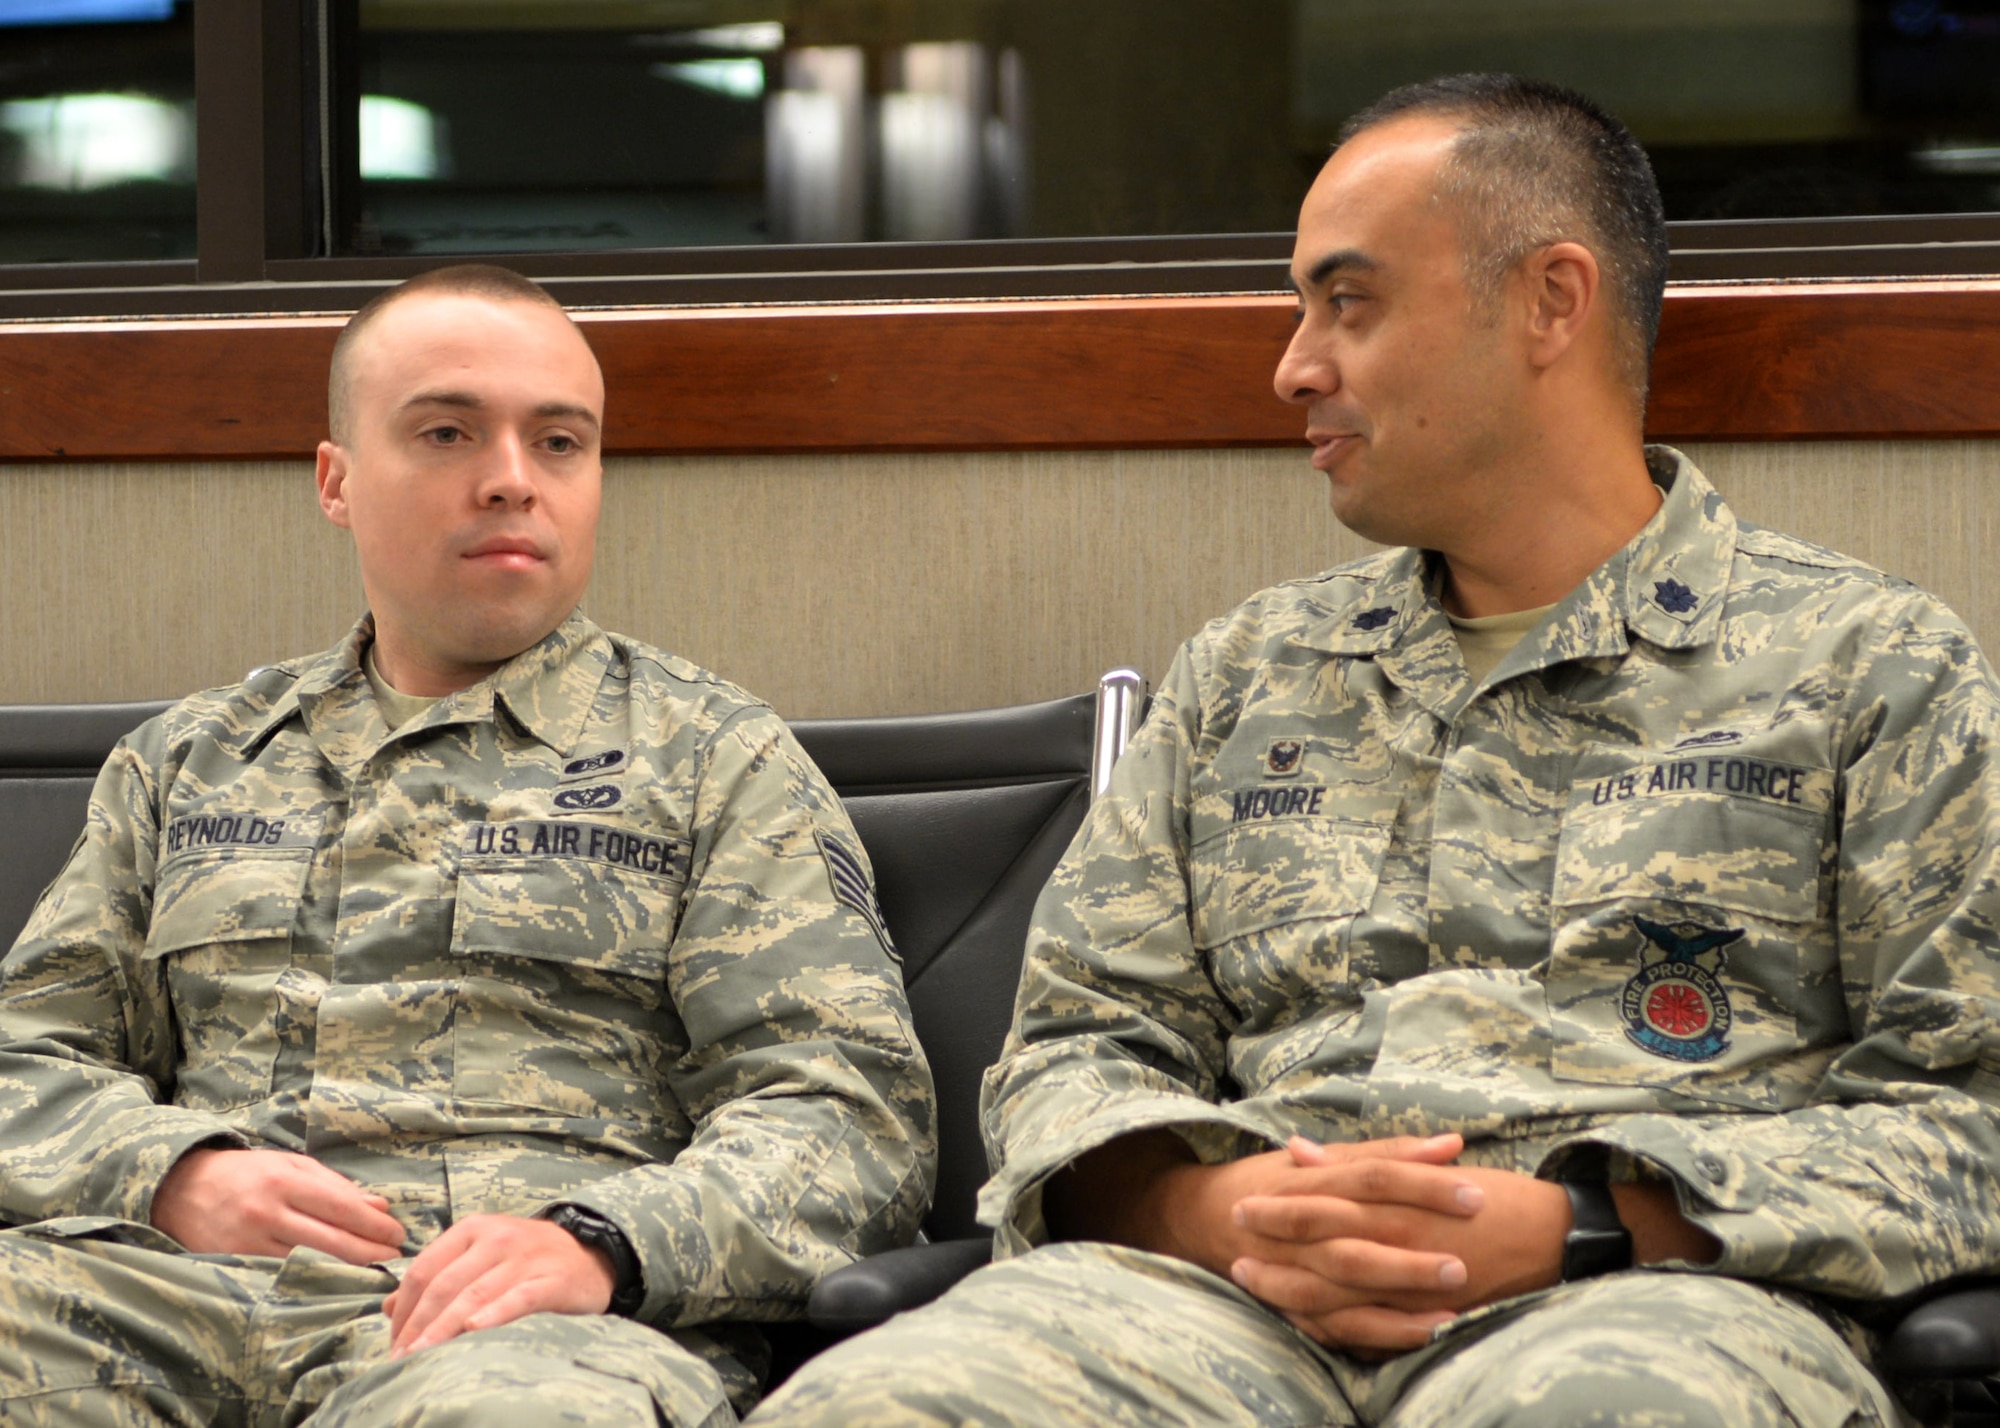 Staff Sgt. Ronald Reynolds, an emergency management technician assigned to the 28th Civil Engineer Squadron, visits with Lt. Col. Gary Moore, 28th CES commander, before deploying from Rapid City Regional Airport in Box Elder, S.D., July 12, 2017. Throughout the summer, several Airmen from the 28th CES will deploy to 10 different countries in the area of U.S. Africa Command and U.S. Central Command responsibility. (U.S. Air Force photo by Senior Airman Denise M. Jenson)